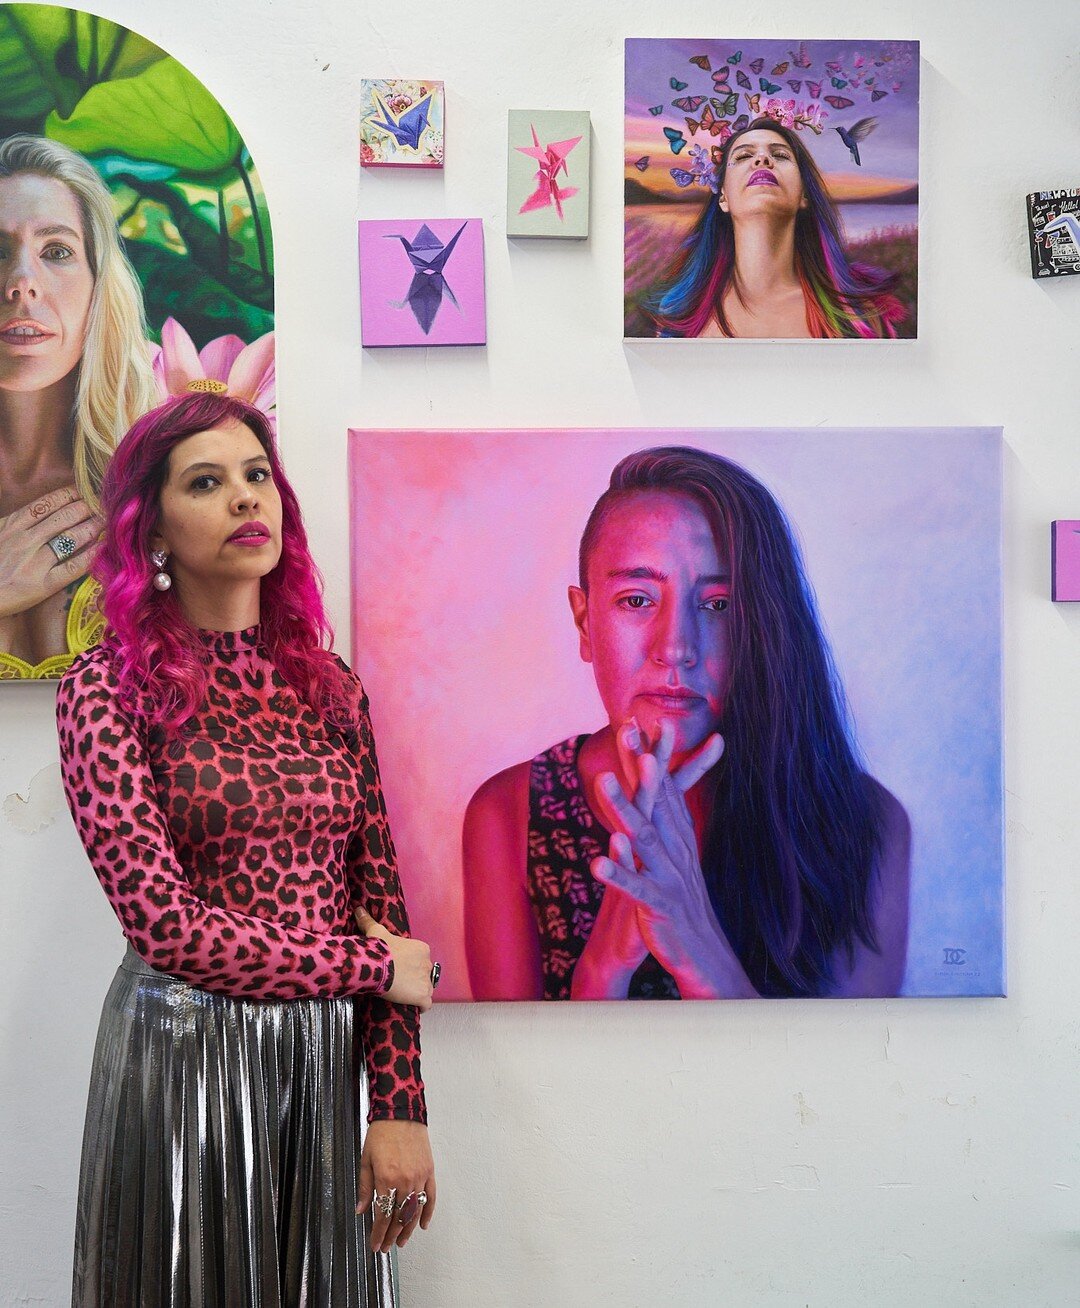 Through a detailed oil painting and drawing technique, contemporary artist Diana Carolina Lopez aims to give visual form to the process of introspection and interpretation. The artist is best known for her unique portraits made with a careful and met